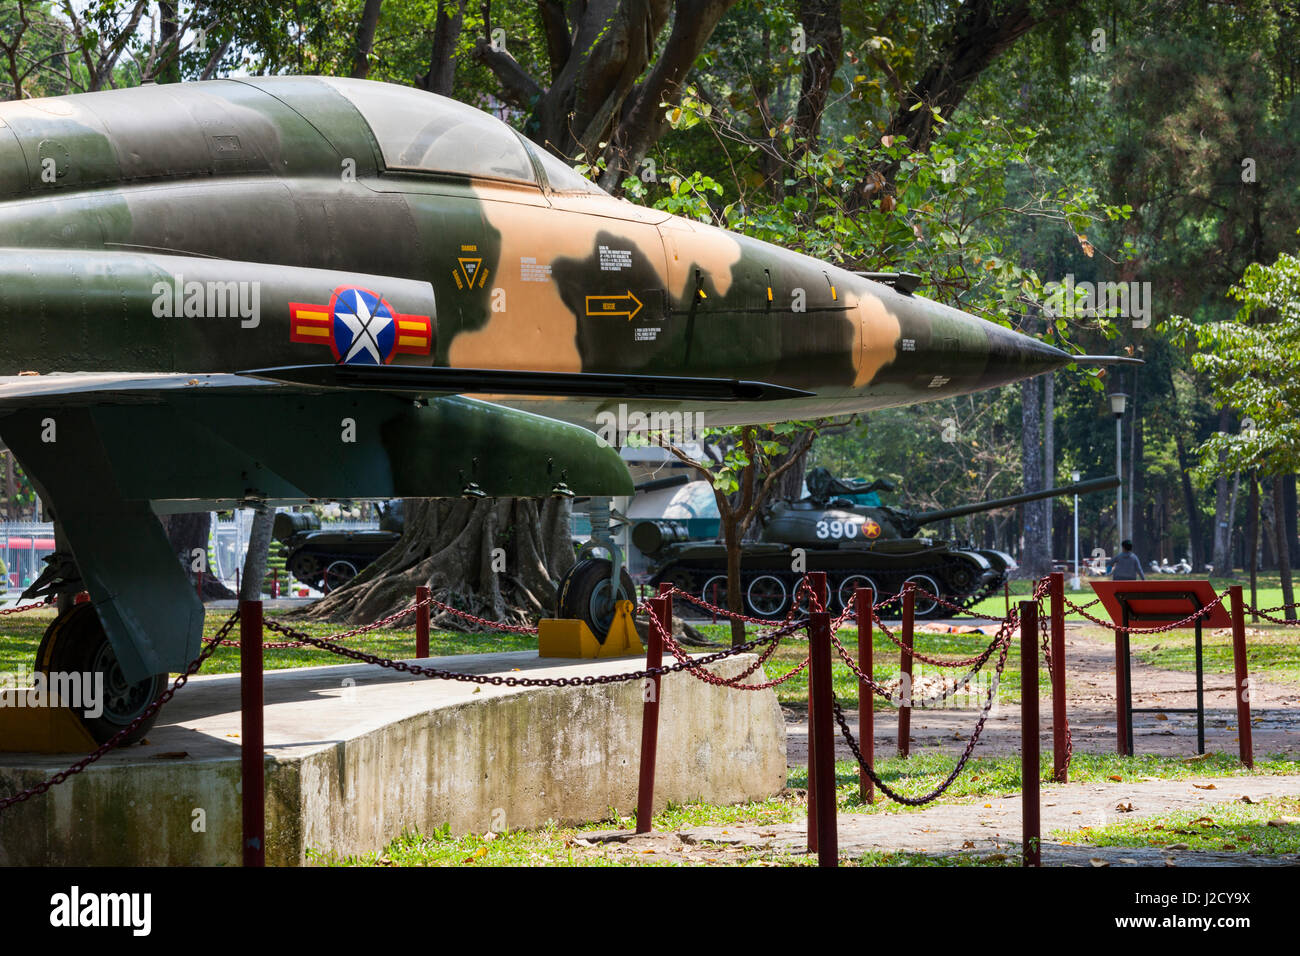 Vietnam, Ho Chi Minh City. Reunification Palace, former seat of South Vietnamese Government, Former South Vietnamese F-5E fighter plane used to bomb the palace at the end of the Vietnam War Stock Photo